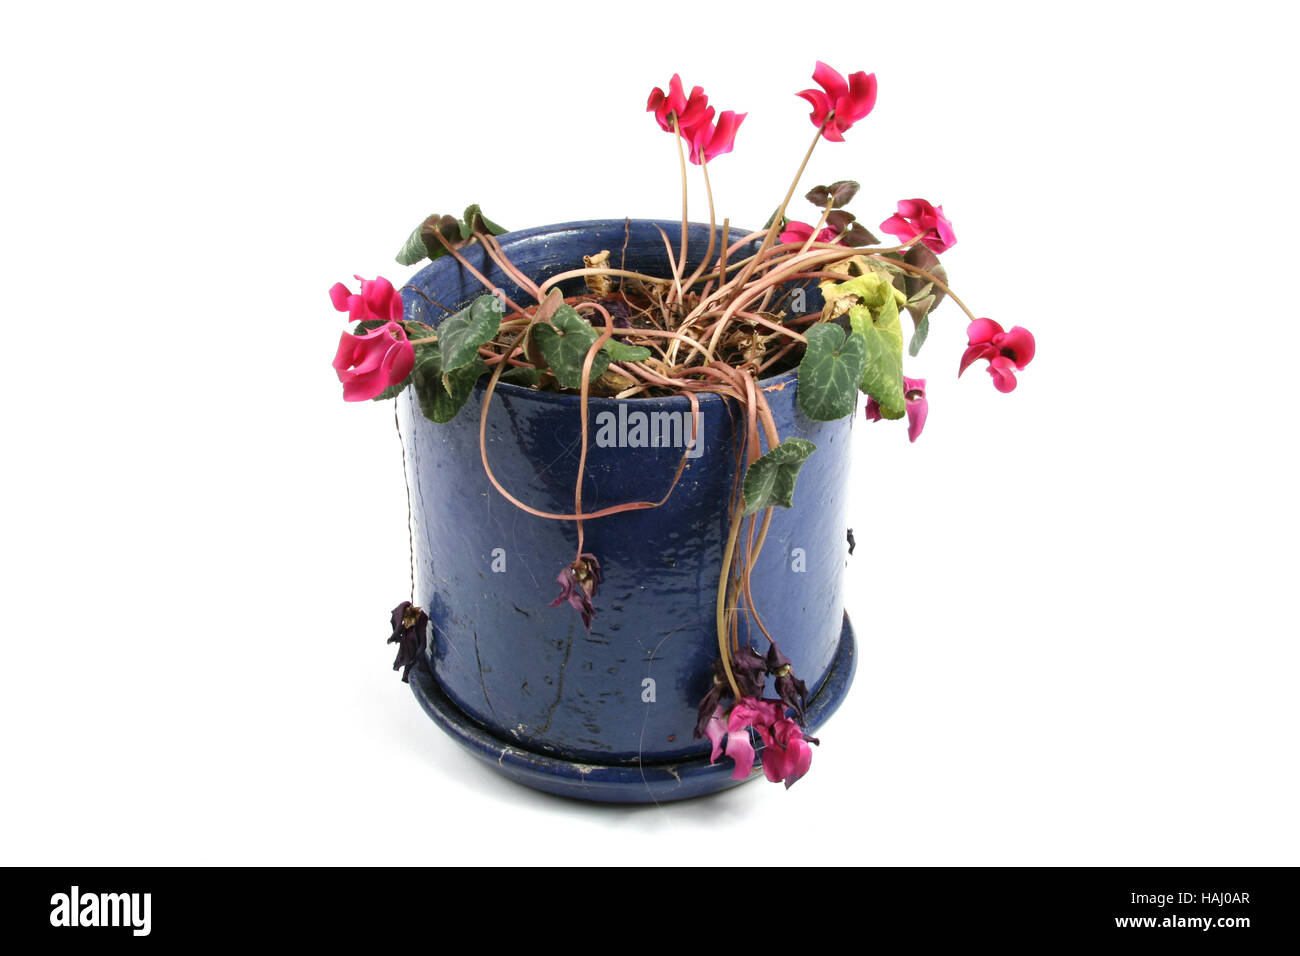 Flowerpot of wilted flowers Stock Photo